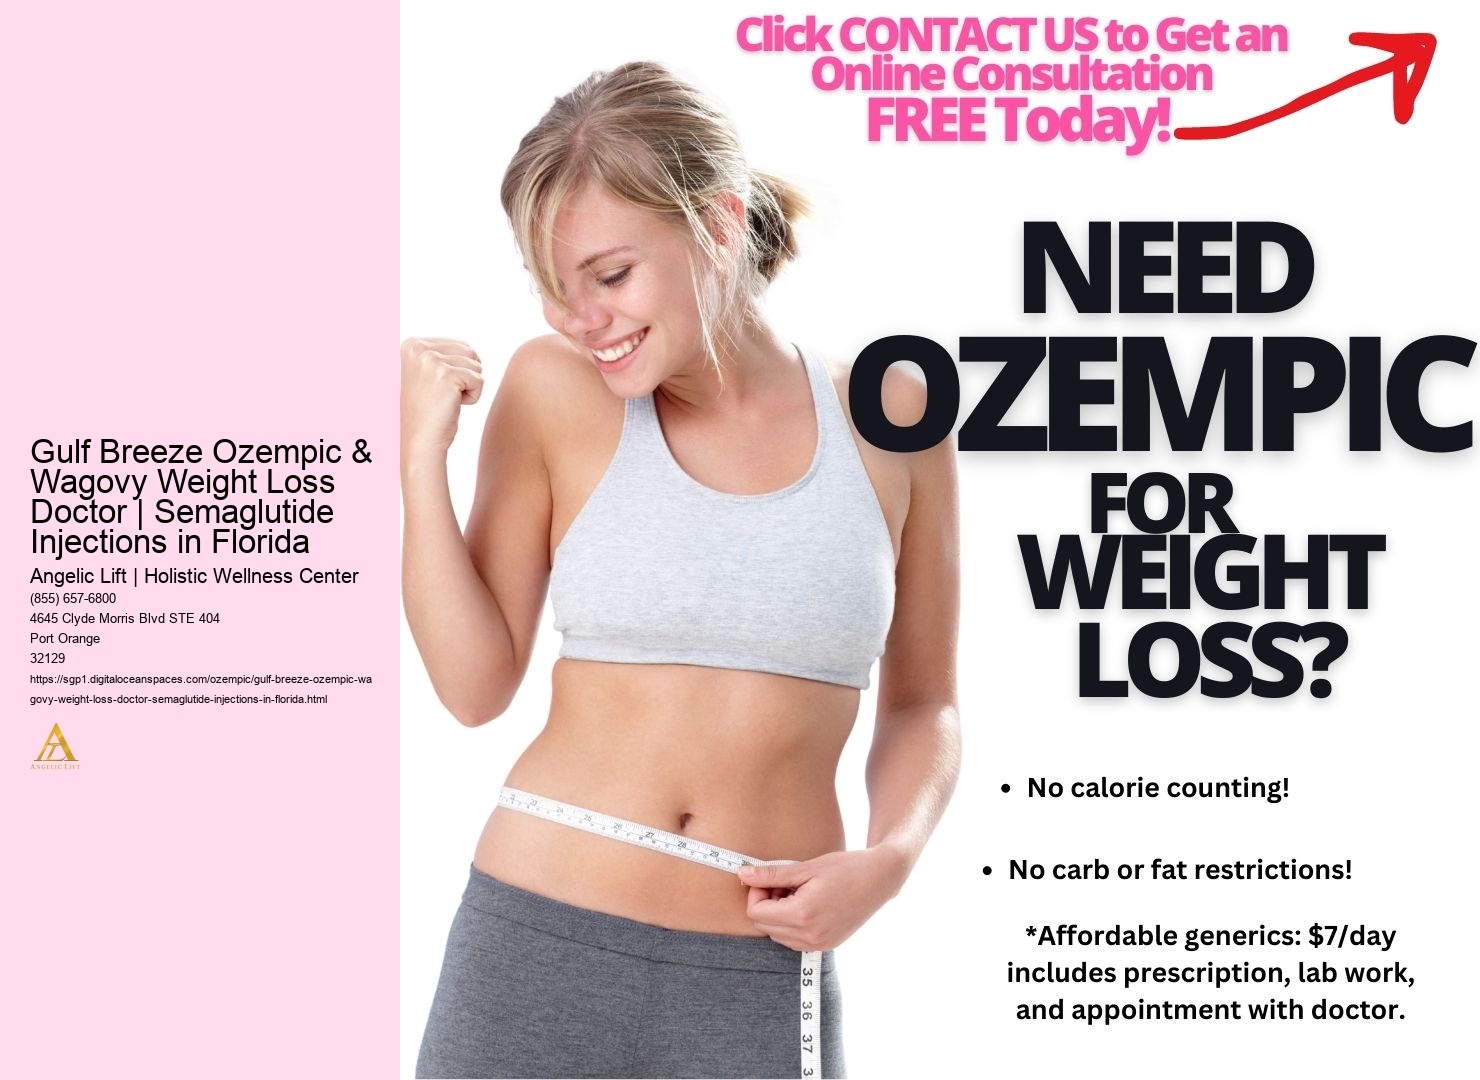 Gulf Breeze Ozempic & Wagovy Weight Loss Doctor | Semaglutide Injections in Florida